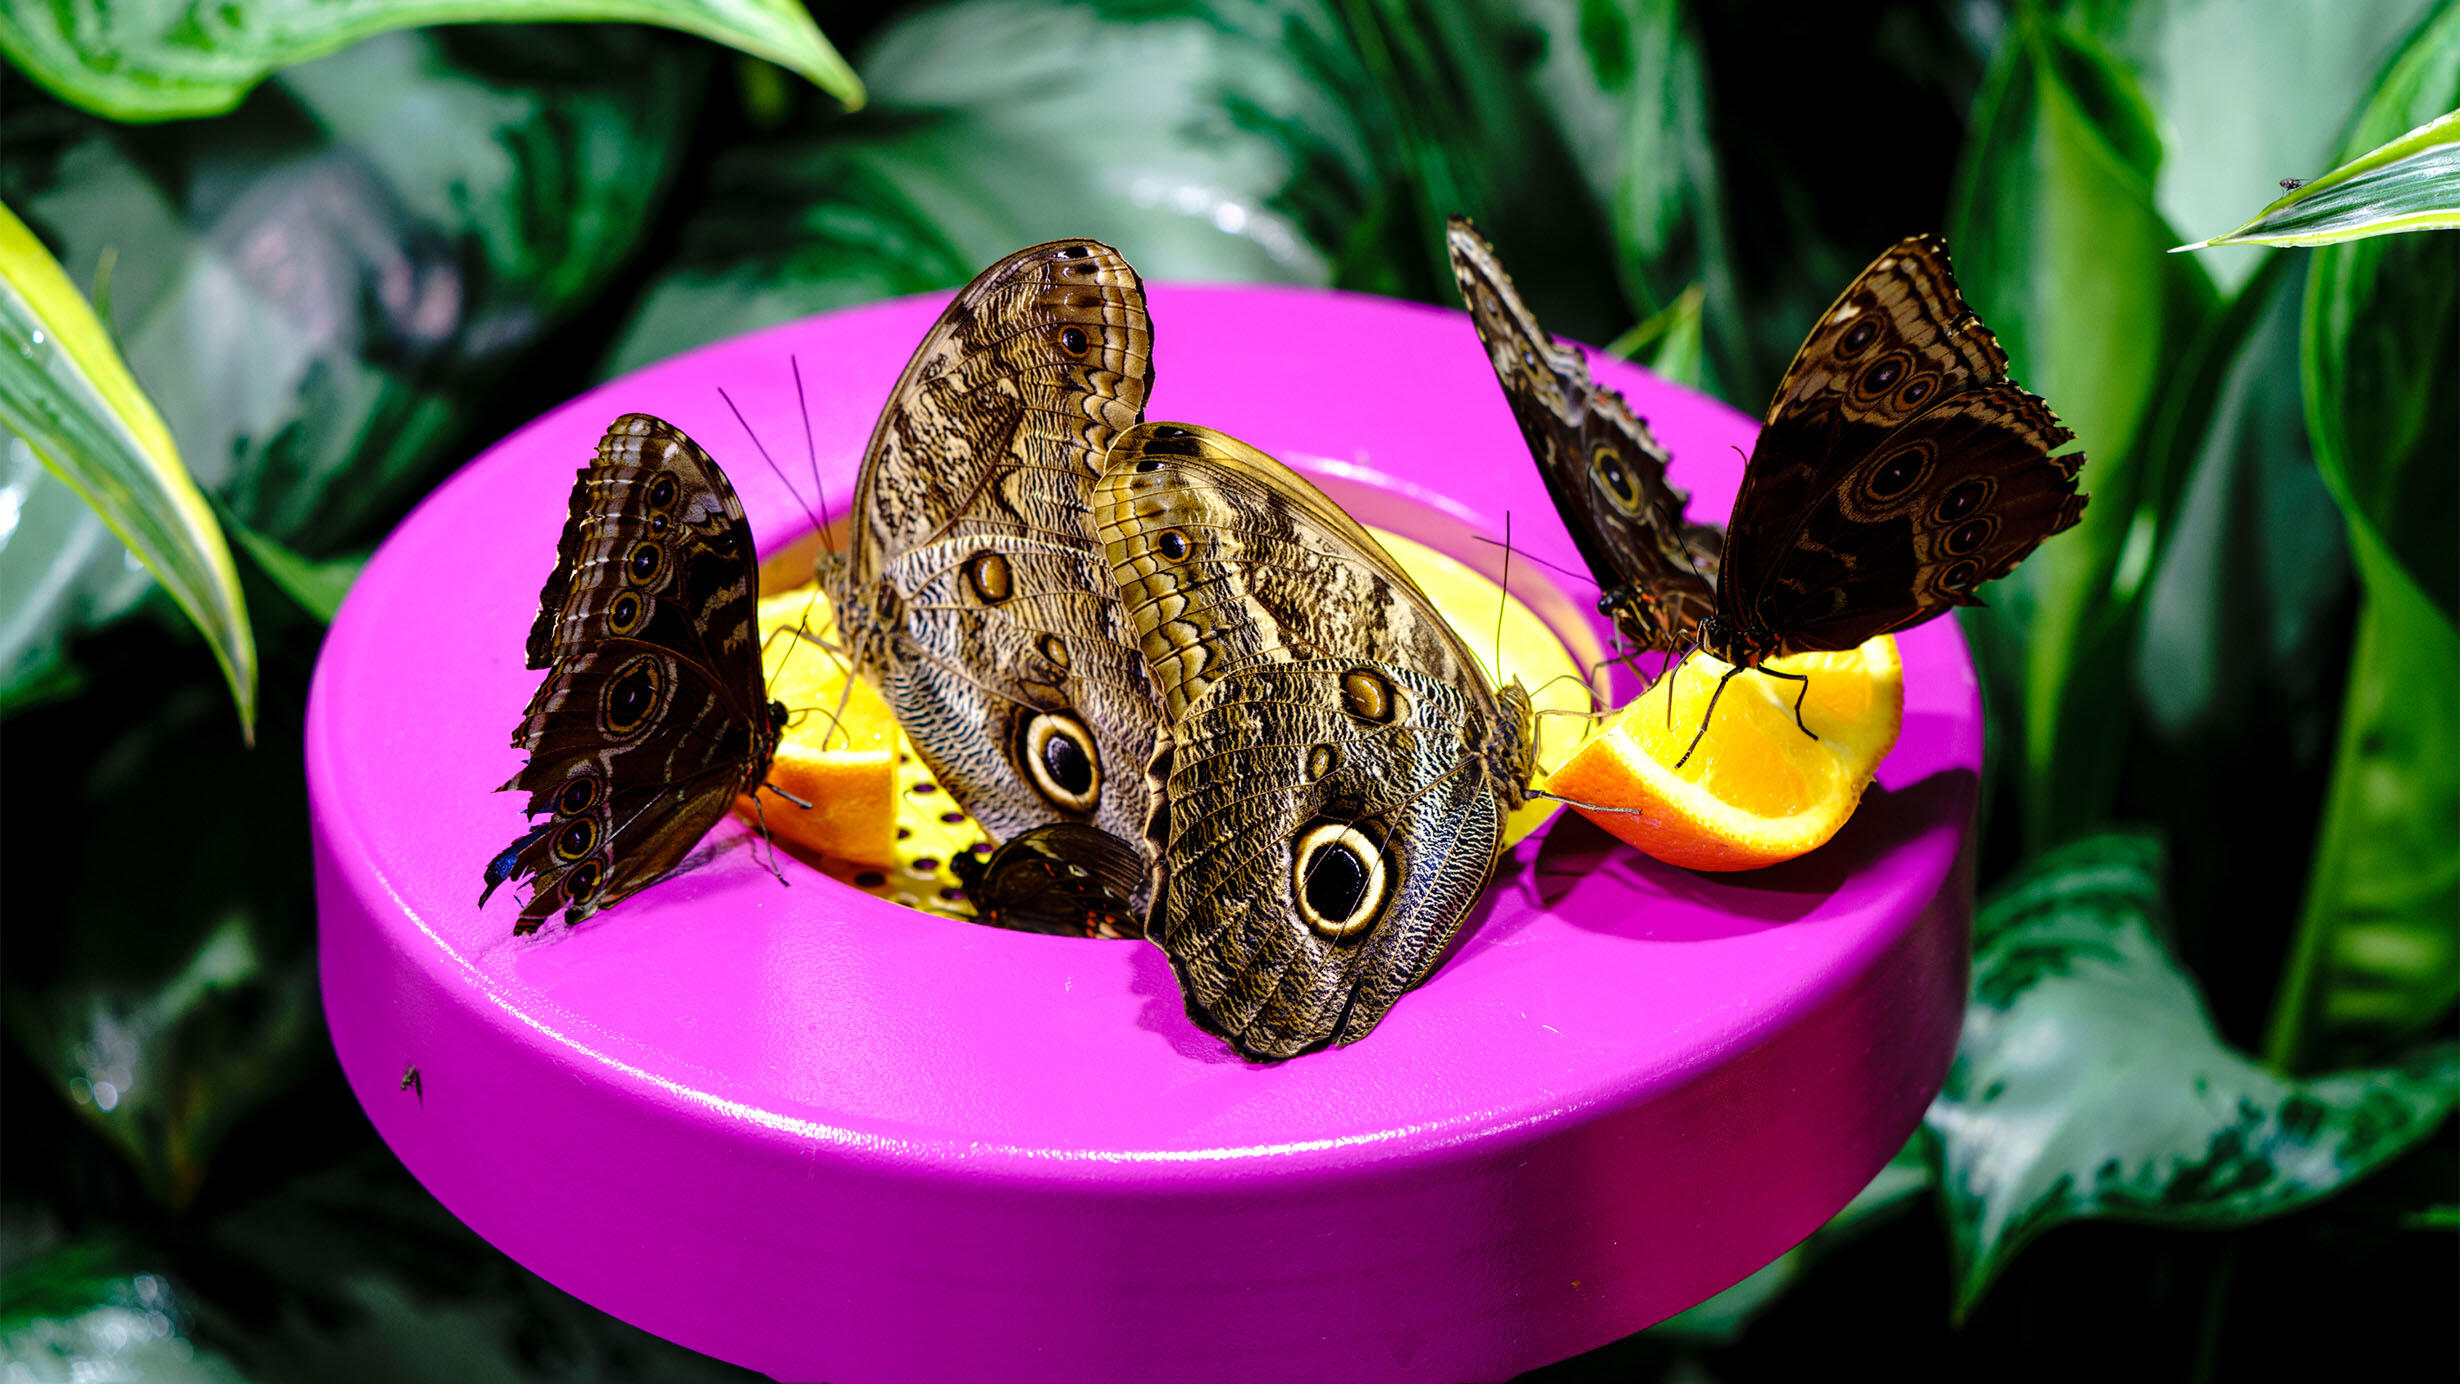 Four butterflies with patterned, dark colored wings feed on orange slices on a brightly colored, circular platform among greenery.